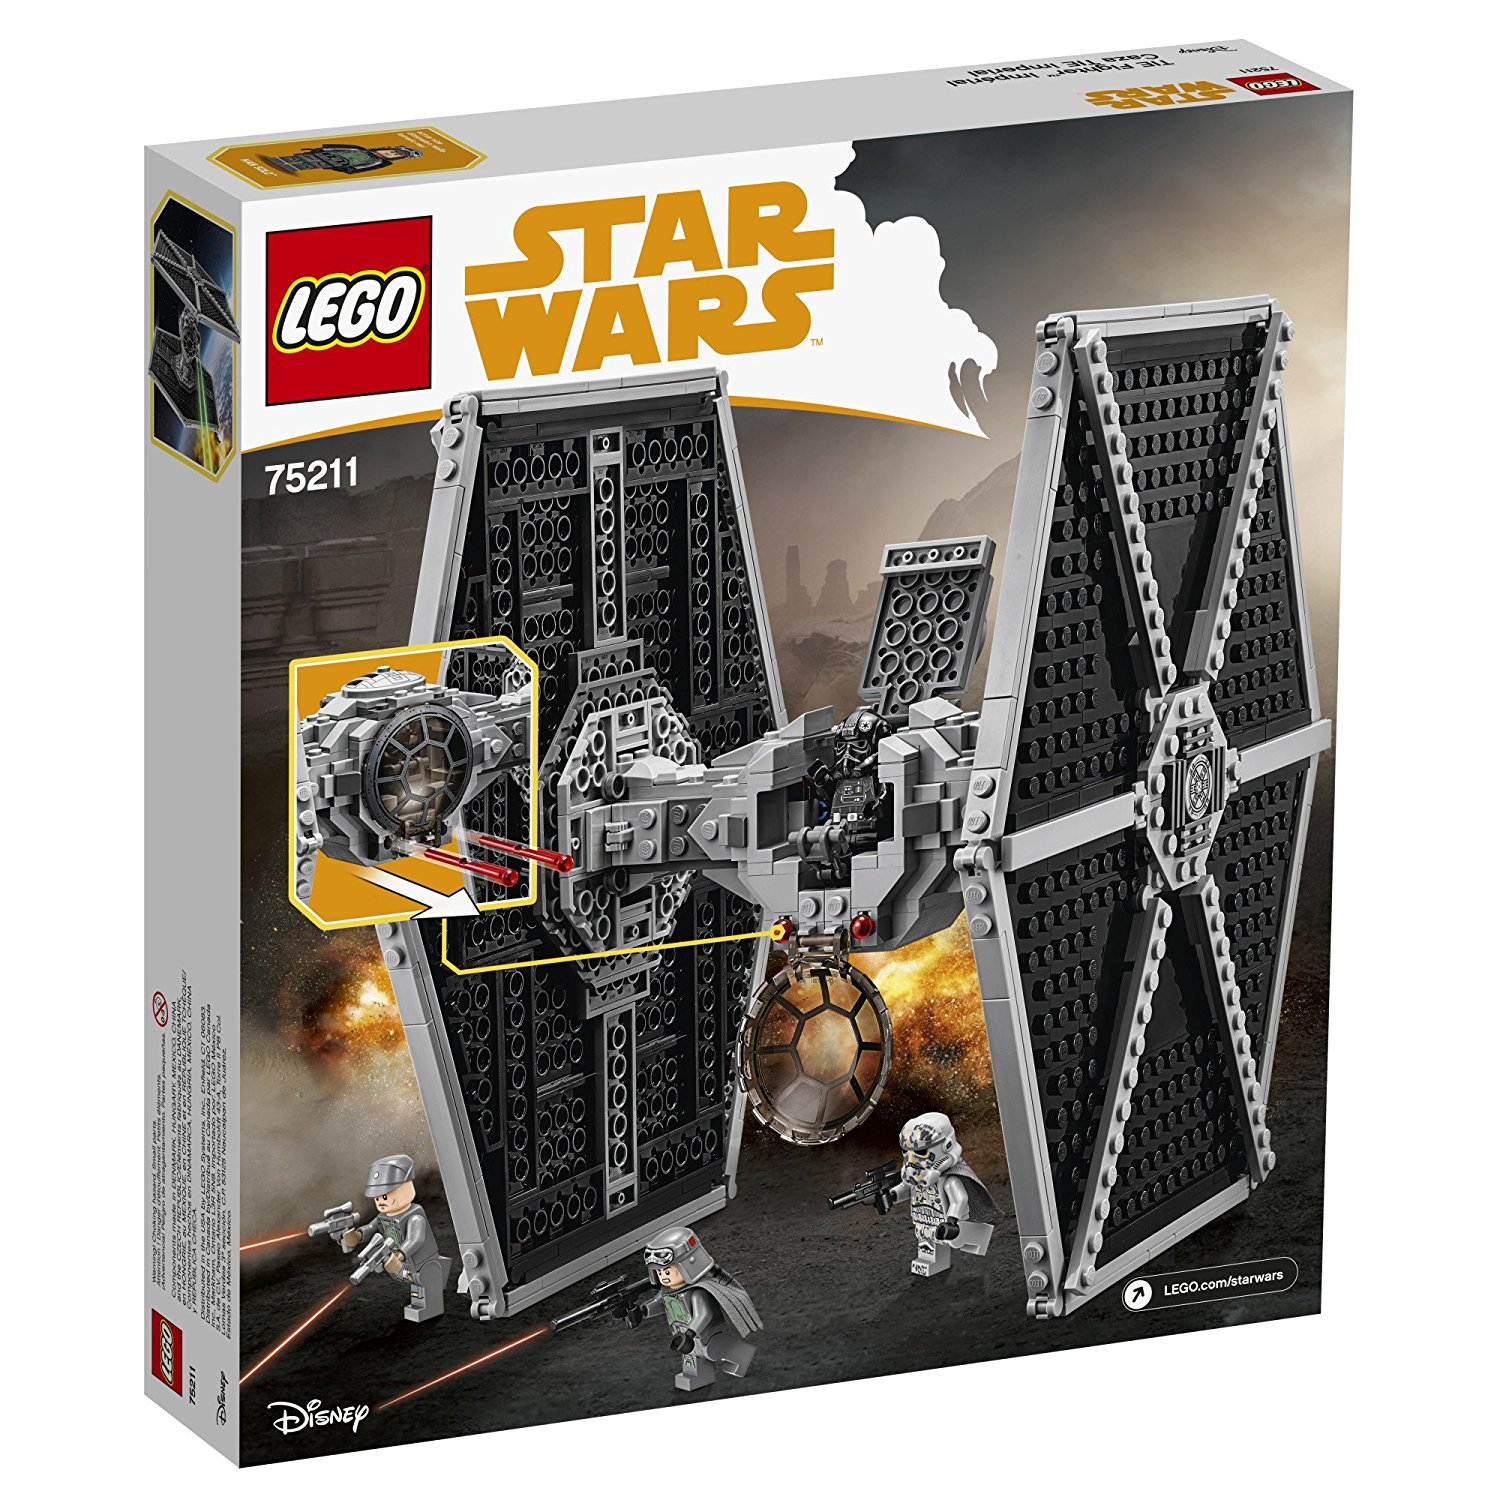 Solo: ASWS Imperial TIE Fighter Lego Set 2